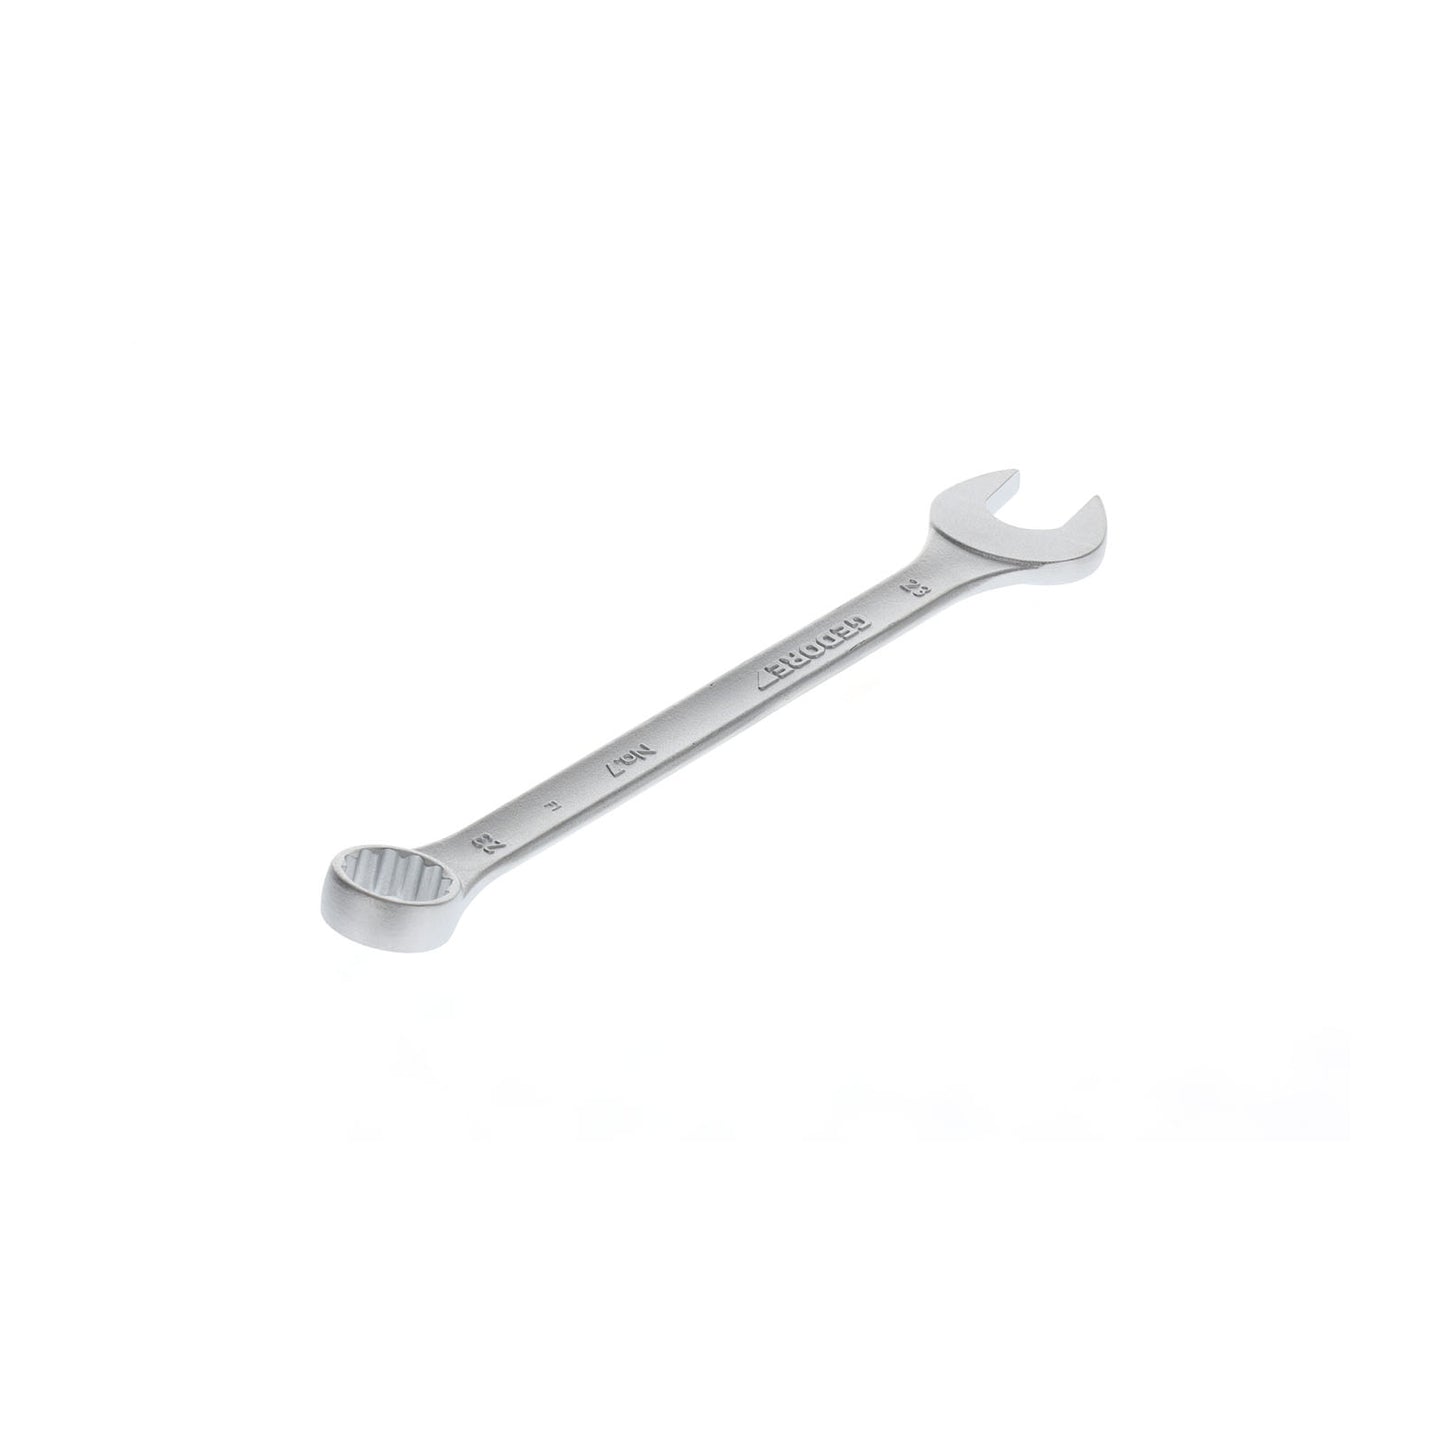 GEDORE 7 23 - Combination Wrench, 23 mm (6092260)